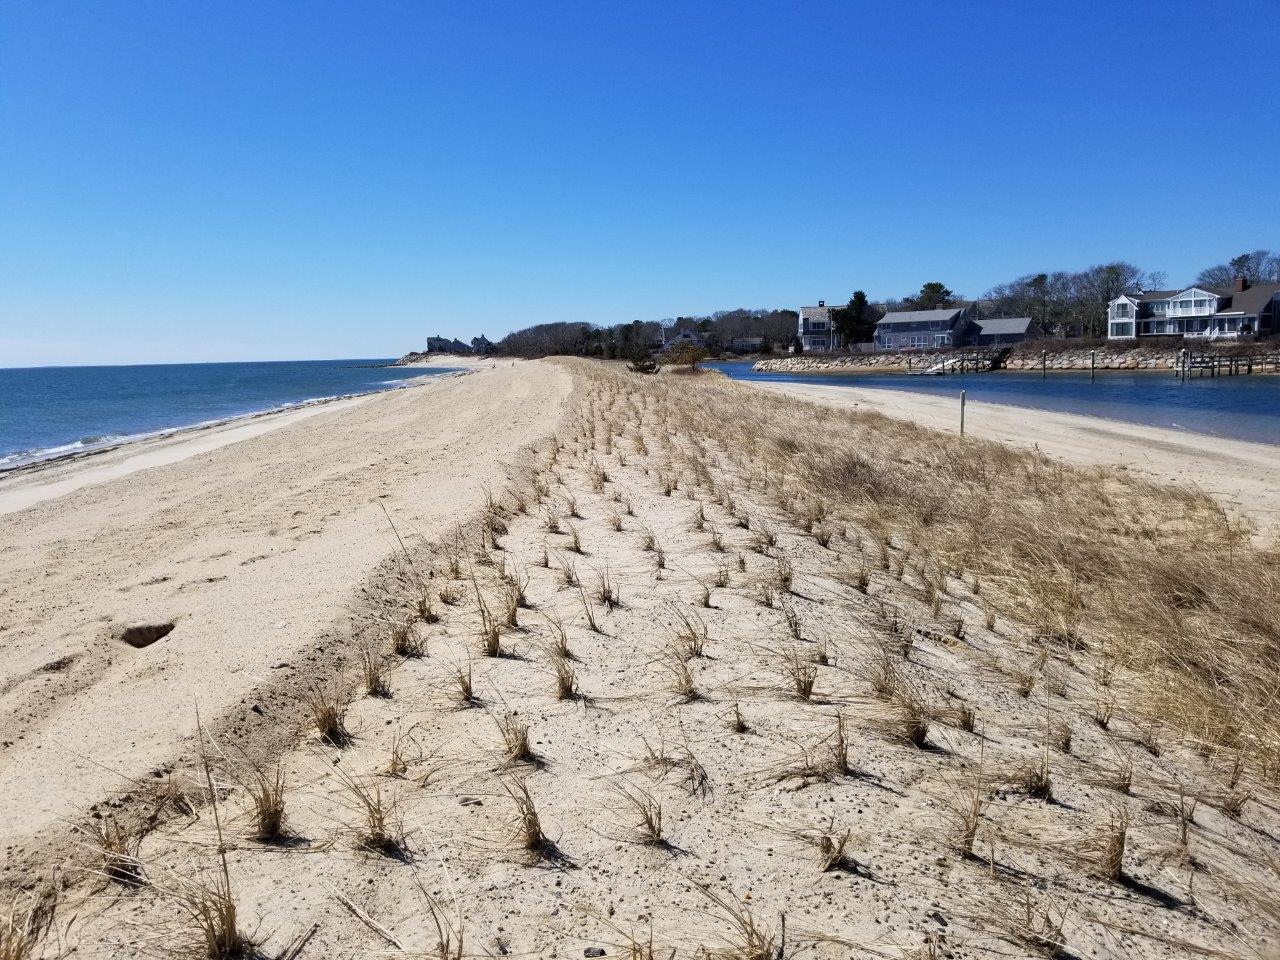 7,000 cubic yards of trucked sand and another 5,500 dubic yards of dredged sand after the March nor'easters.